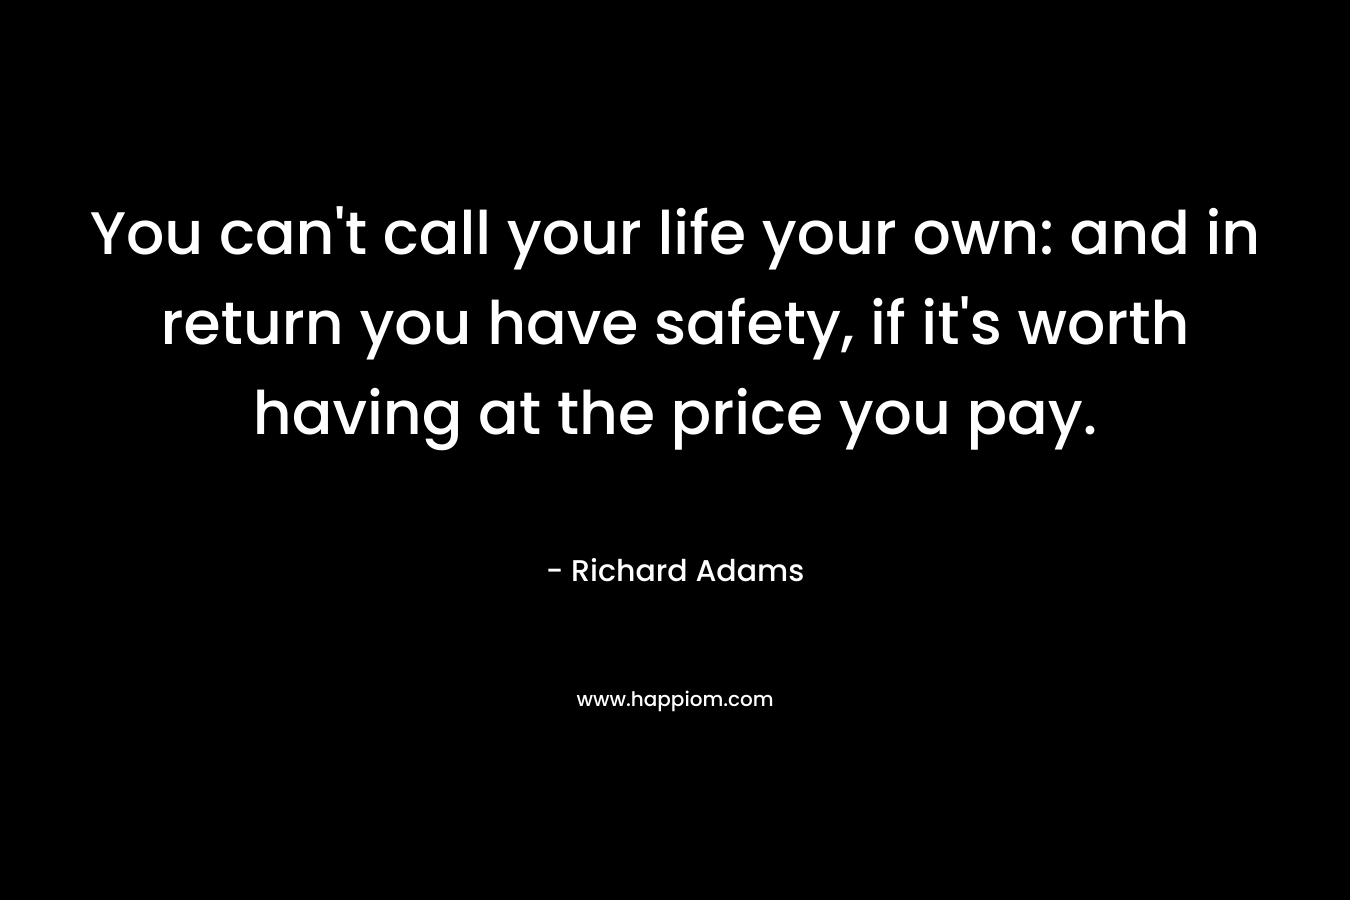 You can't call your life your own: and in return you have safety, if it's worth having at the price you pay.